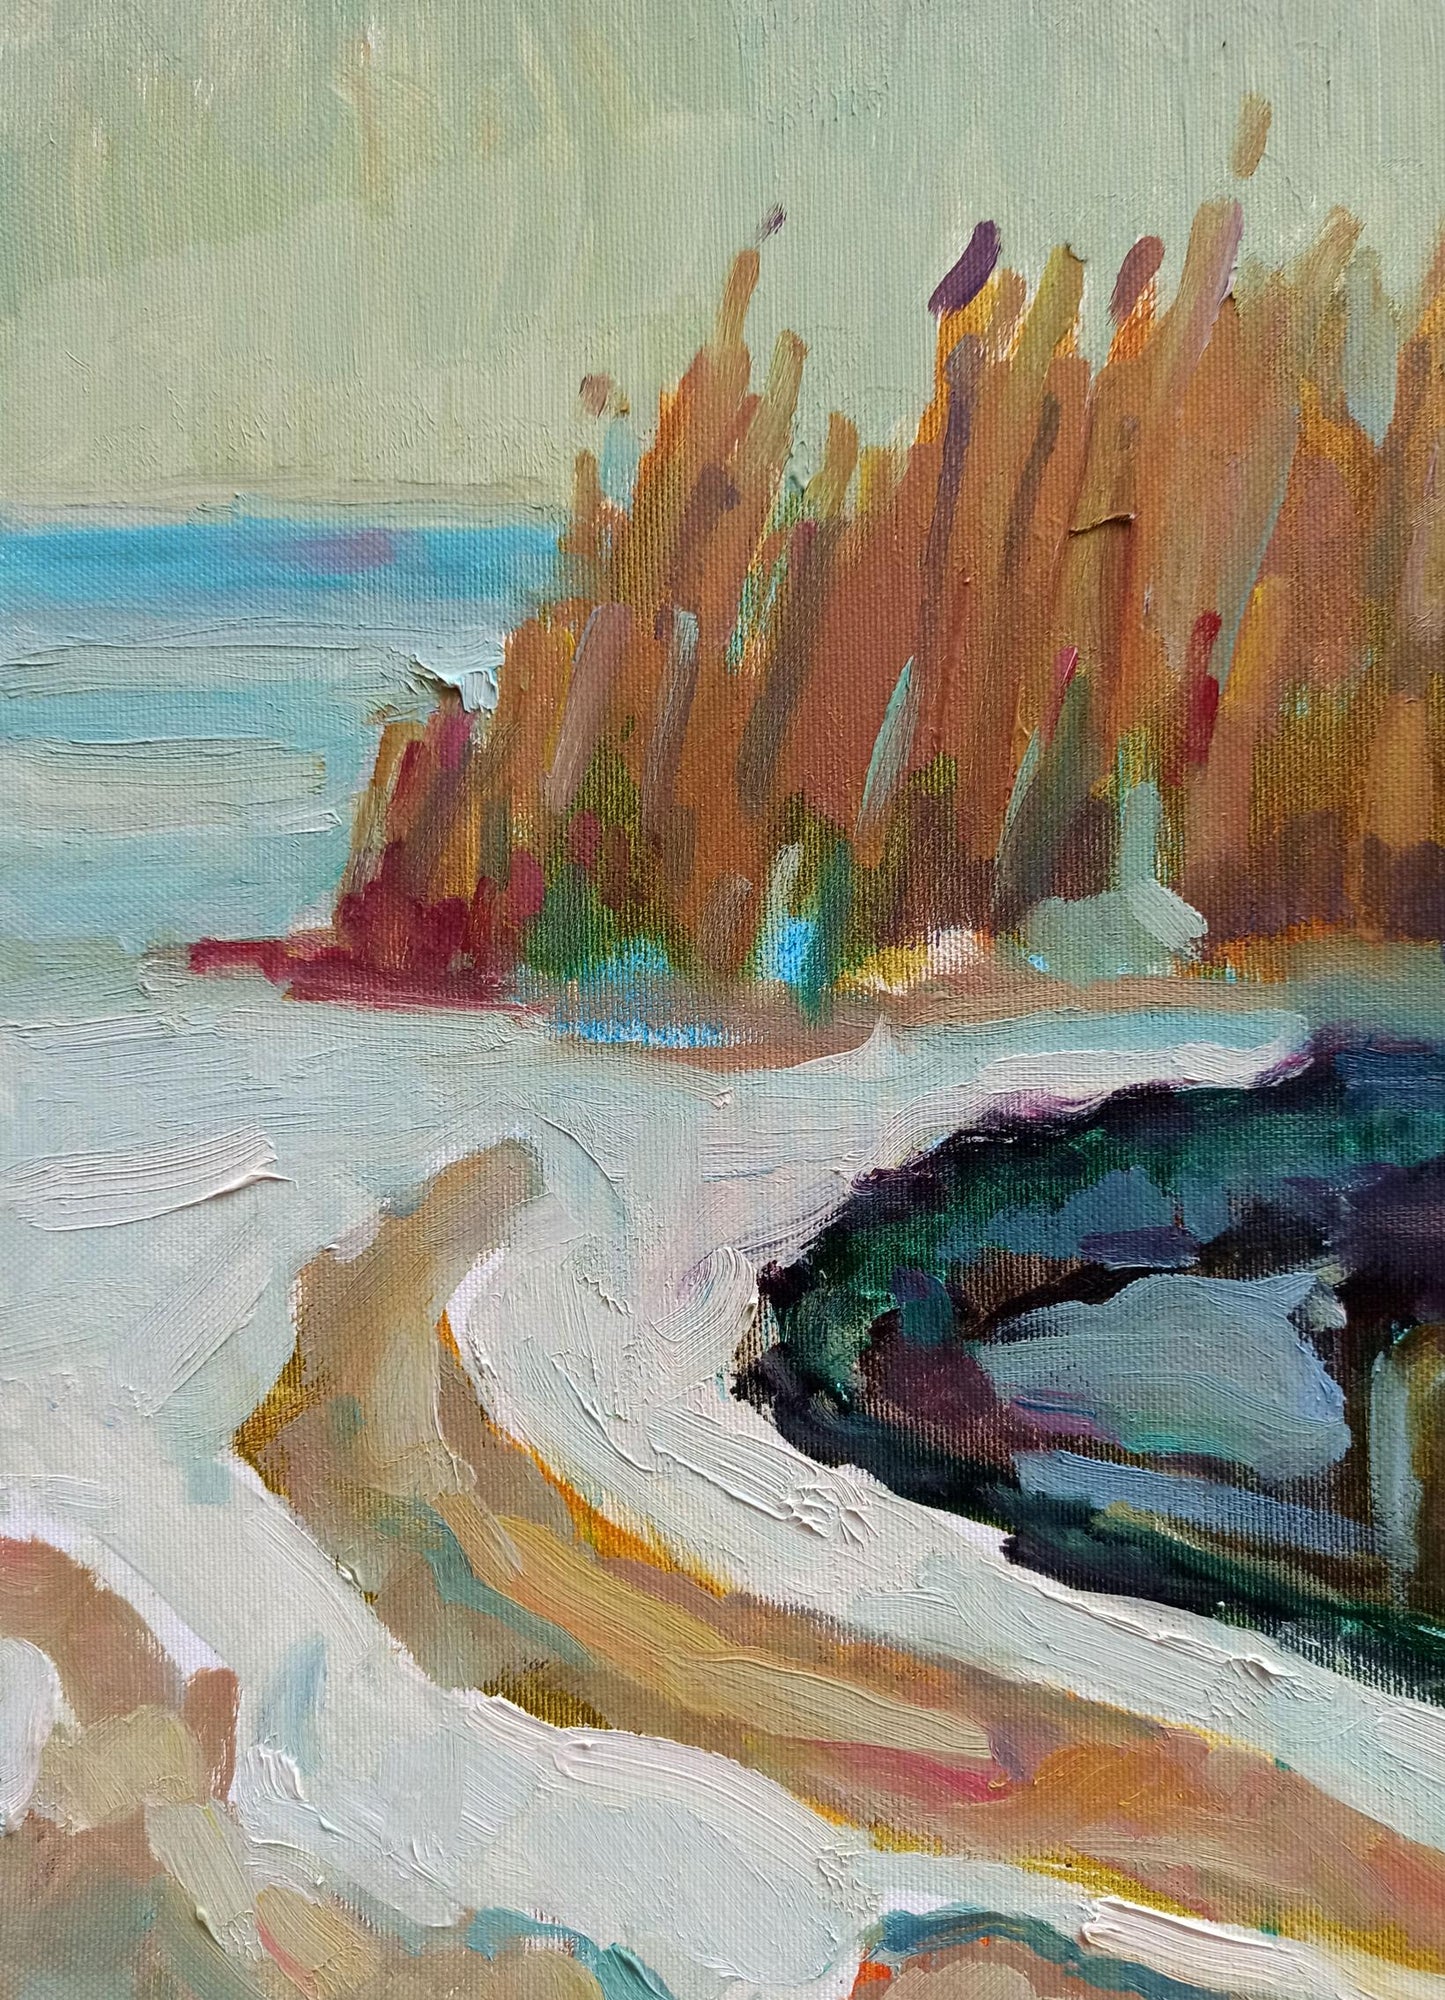 Through his oil painting, Peter Dobrev brings the spirit of spring to life